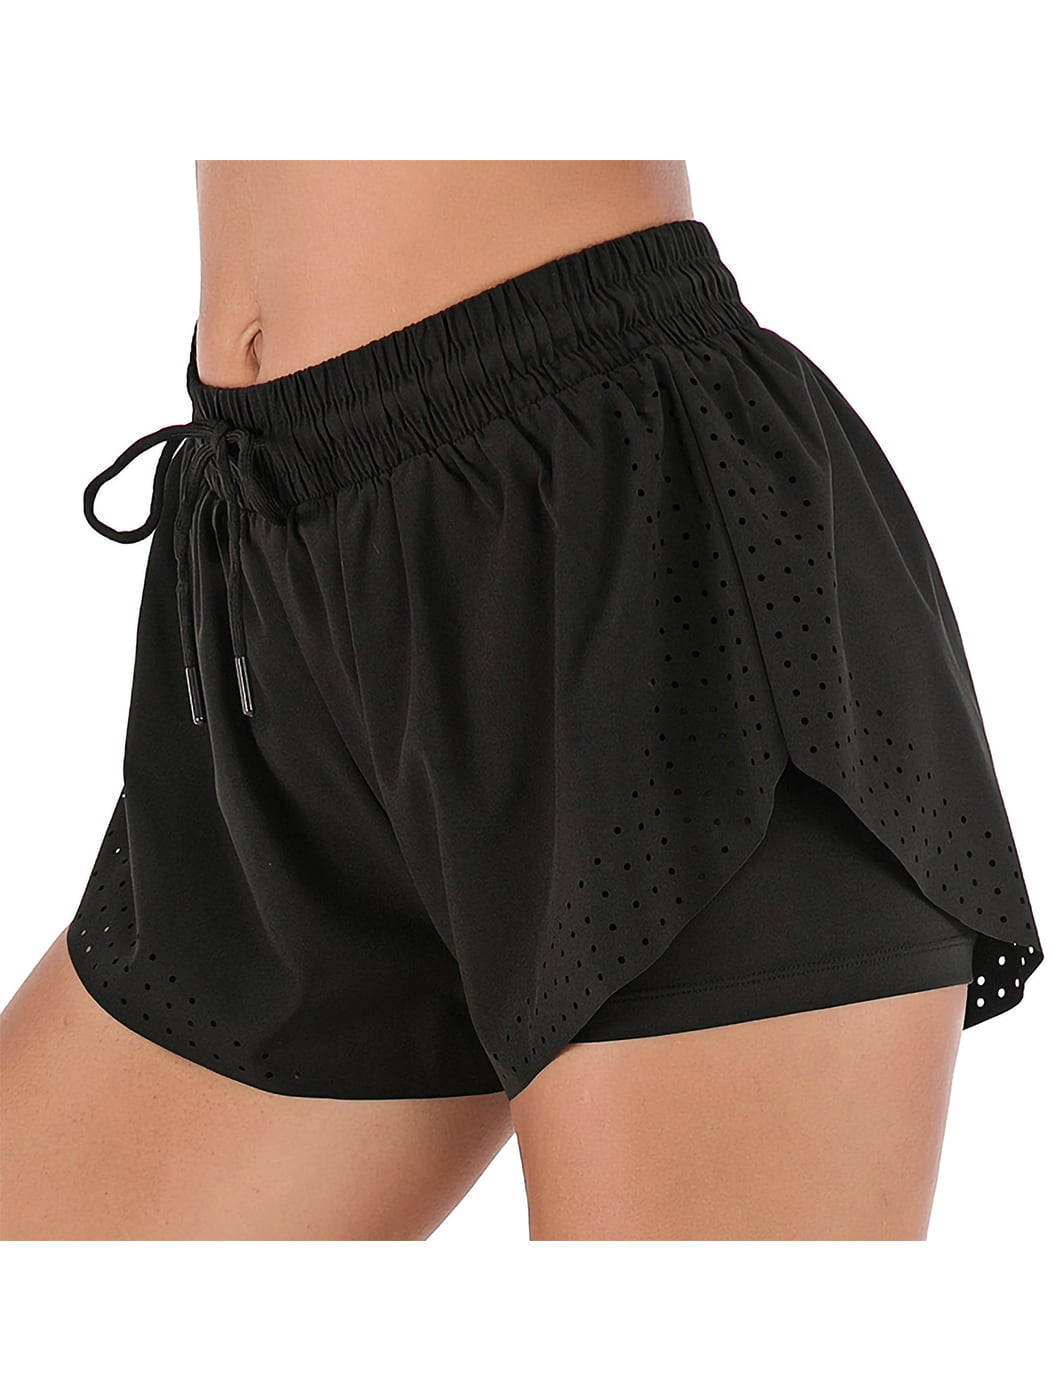 Women's Running Shorts Double Layer Fitness Workout Athletic Shorts, Black,  Small 